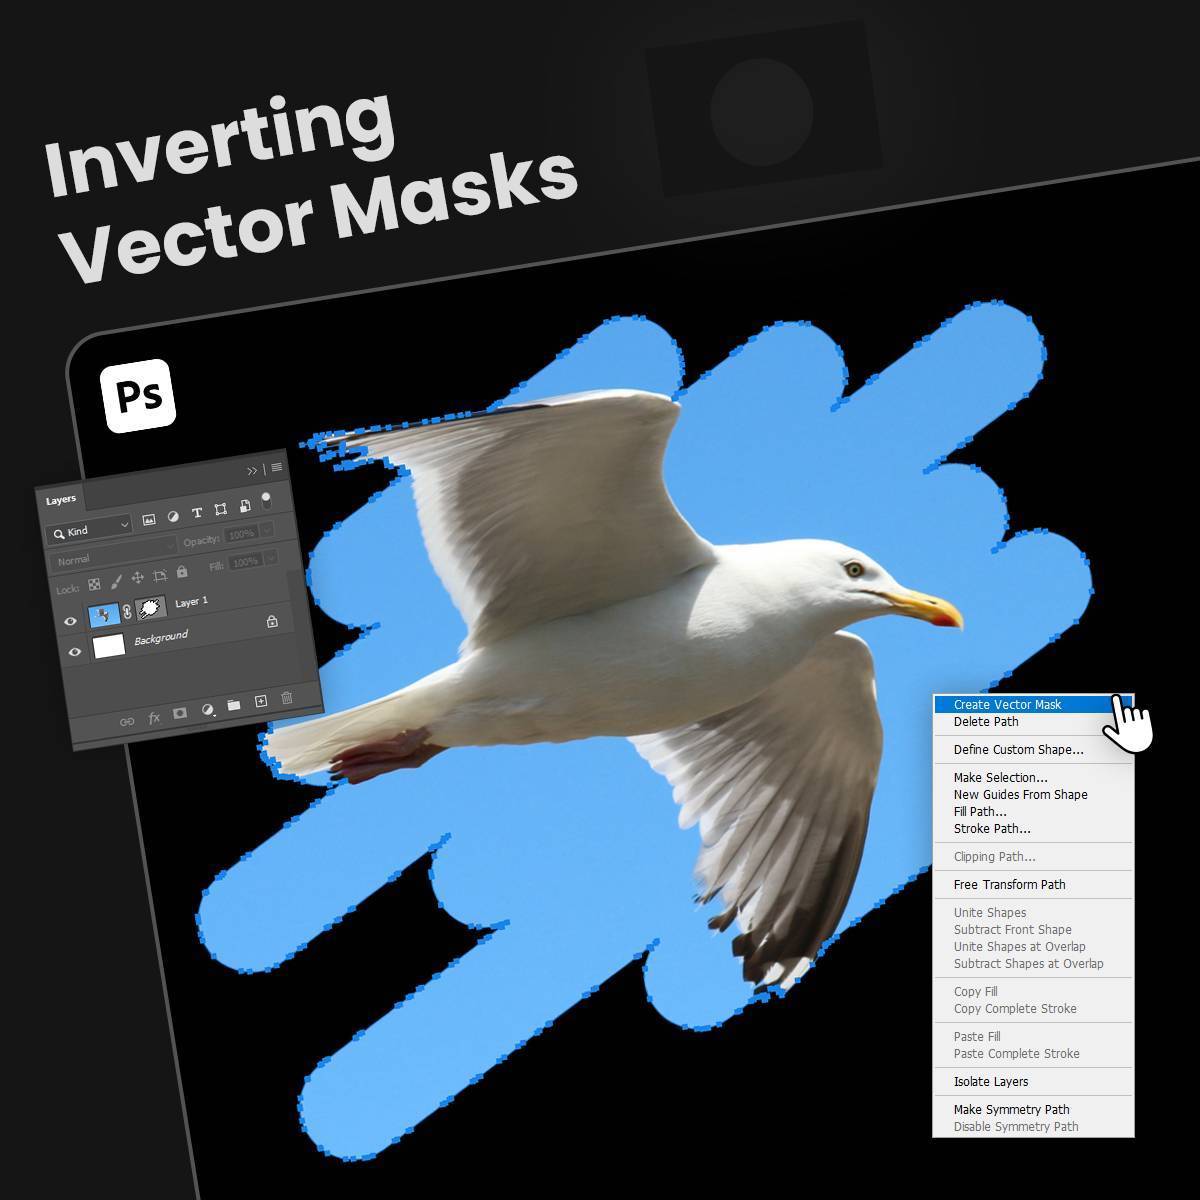 How to Invert a Mask in Photoshop